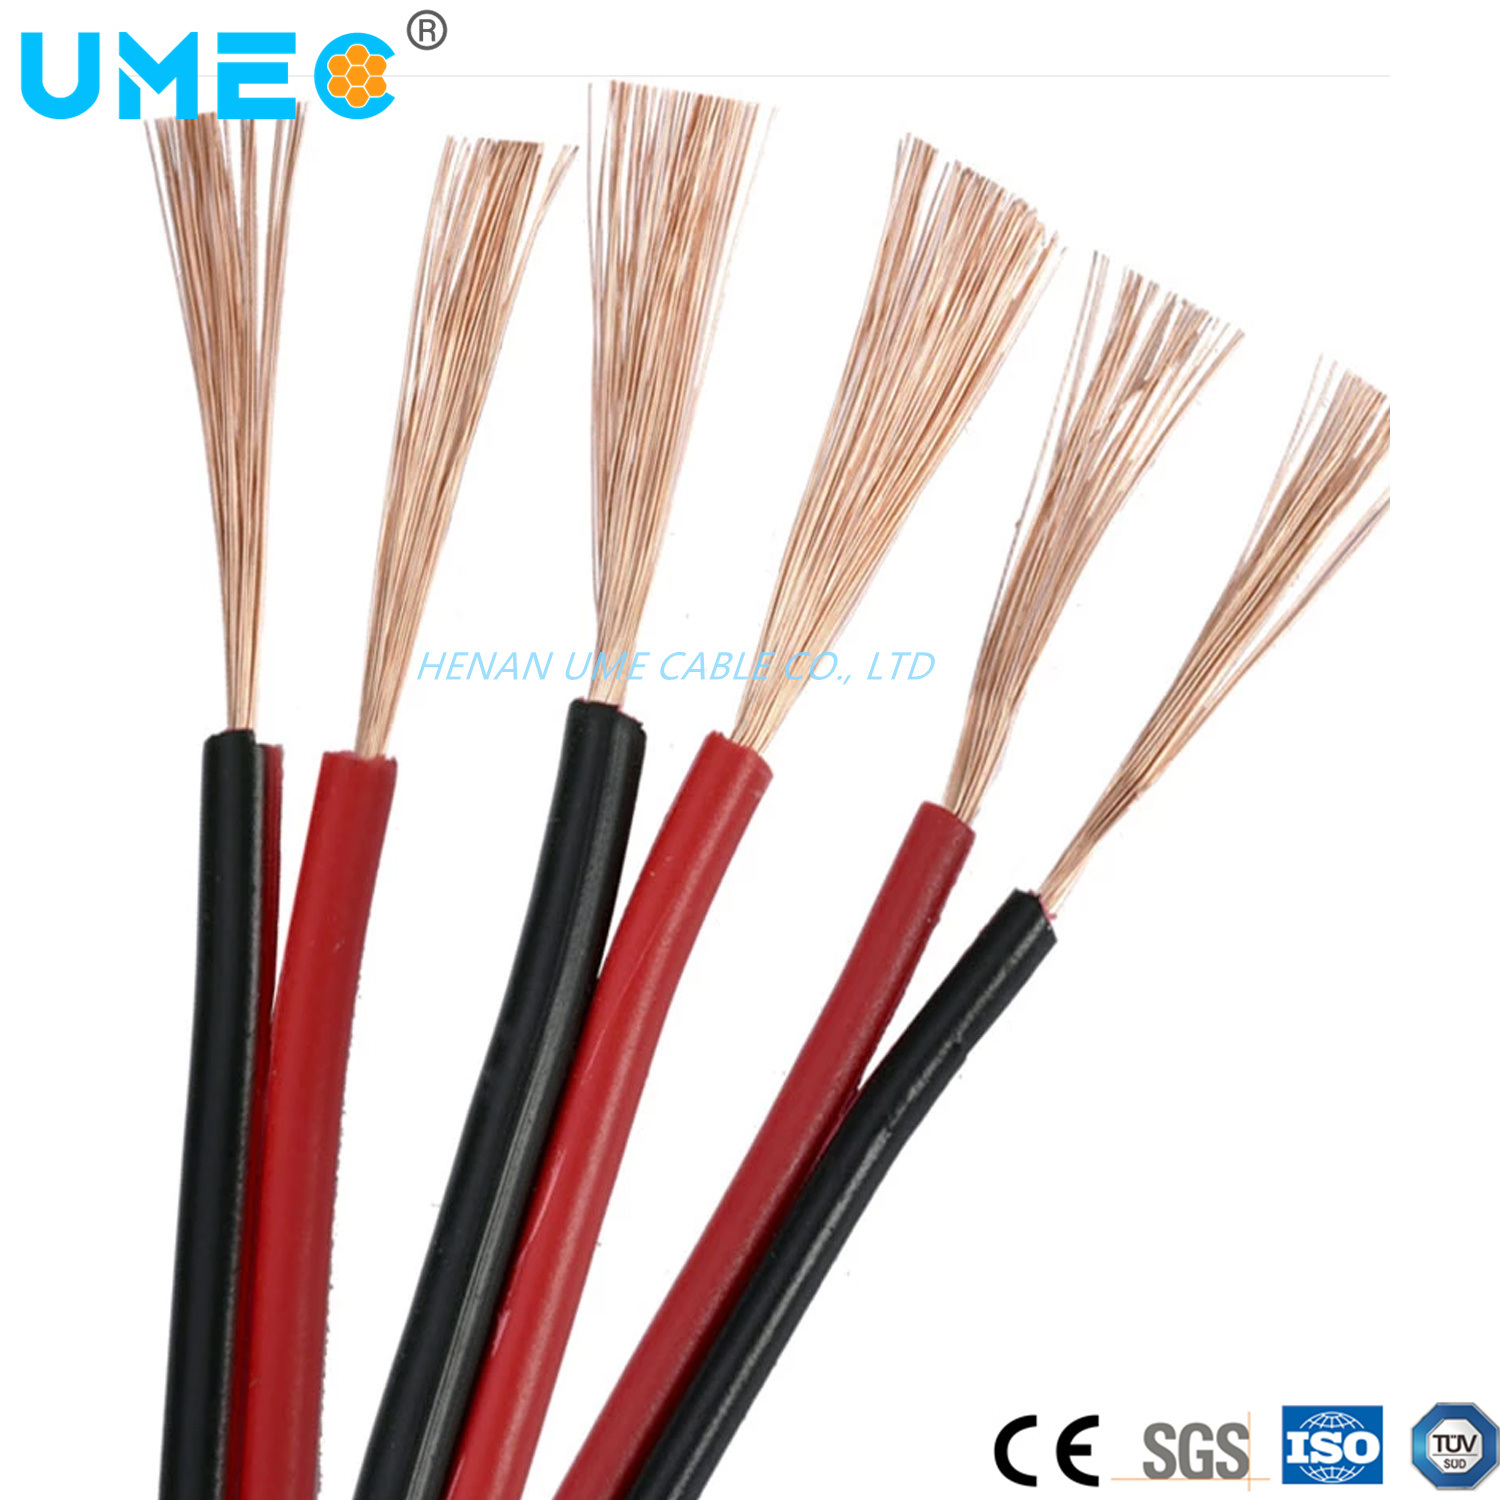 300/500V Low Voltage Flexible Spt Cable Flat Twin Cable 16/18awgx2core